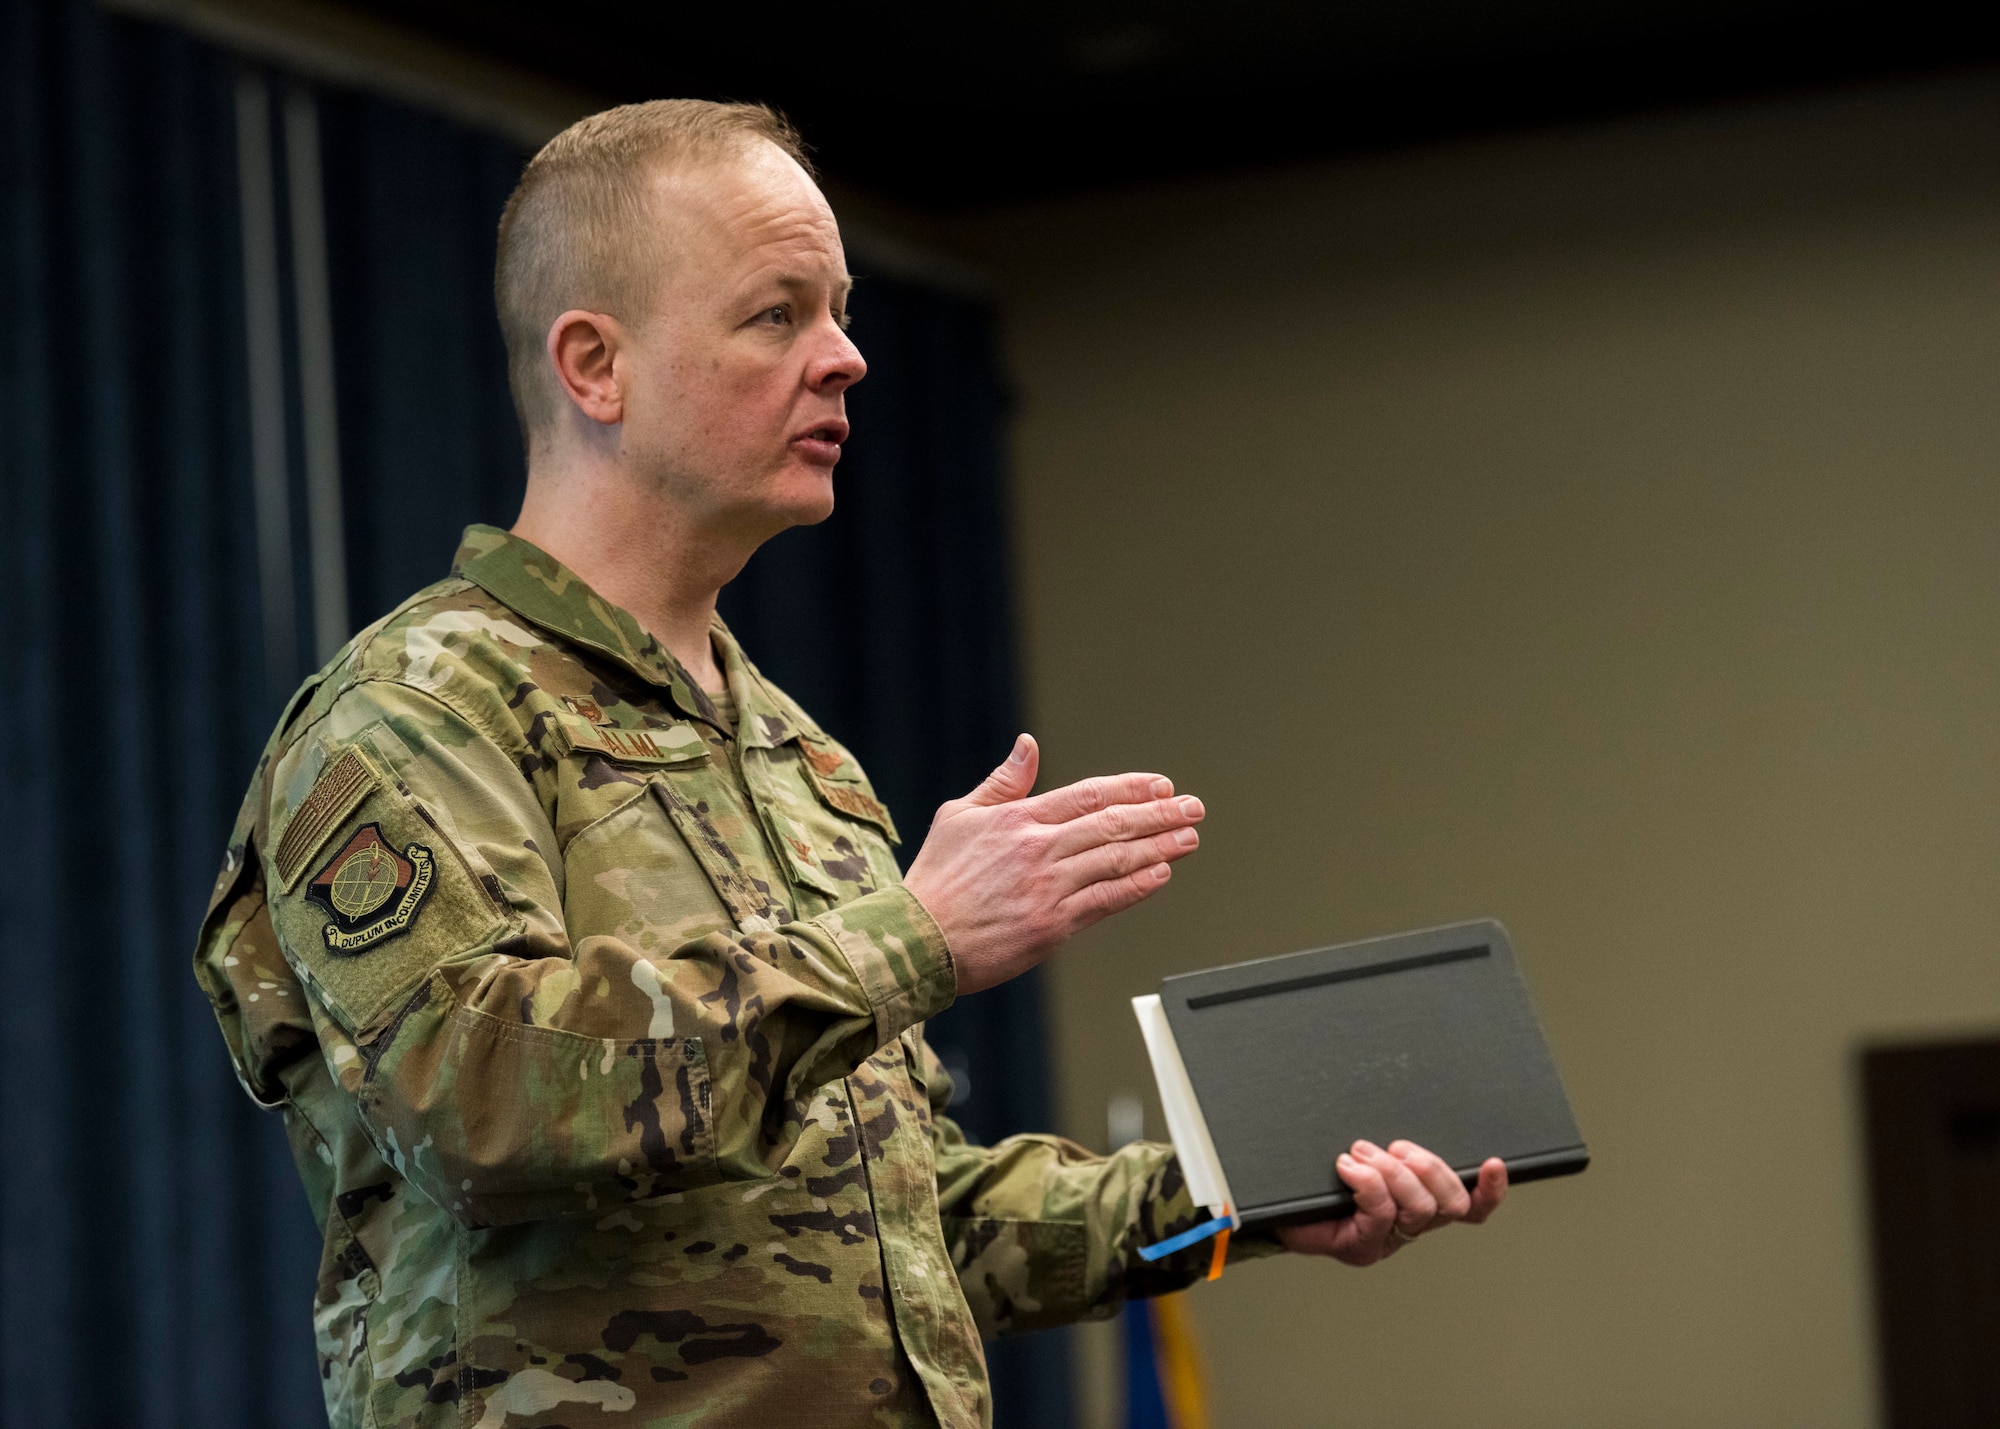 U.S. Air Force Col. Derek Salmi, 92nd Air Refueling Wing commander, addresses attendees of an officer's all-call at Fairchild Air Force Base, Washington, Jan. 28, 2020. The first change addressed was the restructuring of developmental categories, effective Oct. 19, 2019, aligning officers to compete against others in the six new categories of Air Operations and Special Warfare, Space Operations, Nuclear and Missile Operations, Information Warfare, Combat Support and Force Modernization. (U.S. Air Force photo by Senior Airman Lawrence Sena)